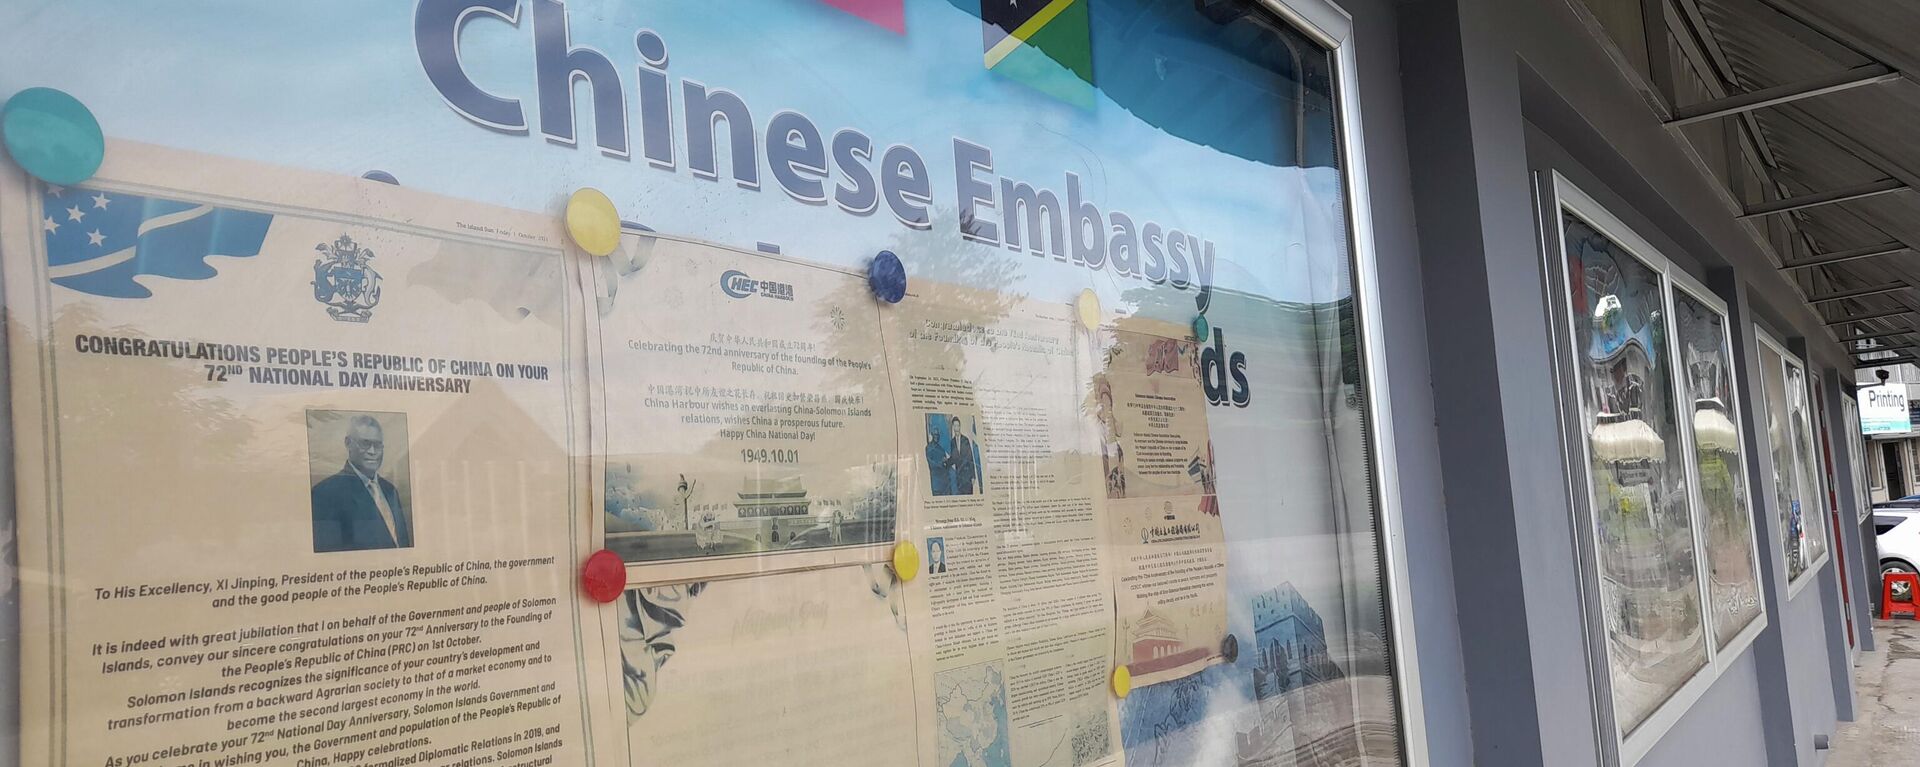 A display case of photos is seen outside Chinese Embassy in Honiara, Solomon Islands, Saturday, April 2, 2022. Seeking to counter international fears over its new security alliance with China, the Solomon Islands said it won't allow China to build a military base there.  - Sputnik International, 1920, 20.04.2022